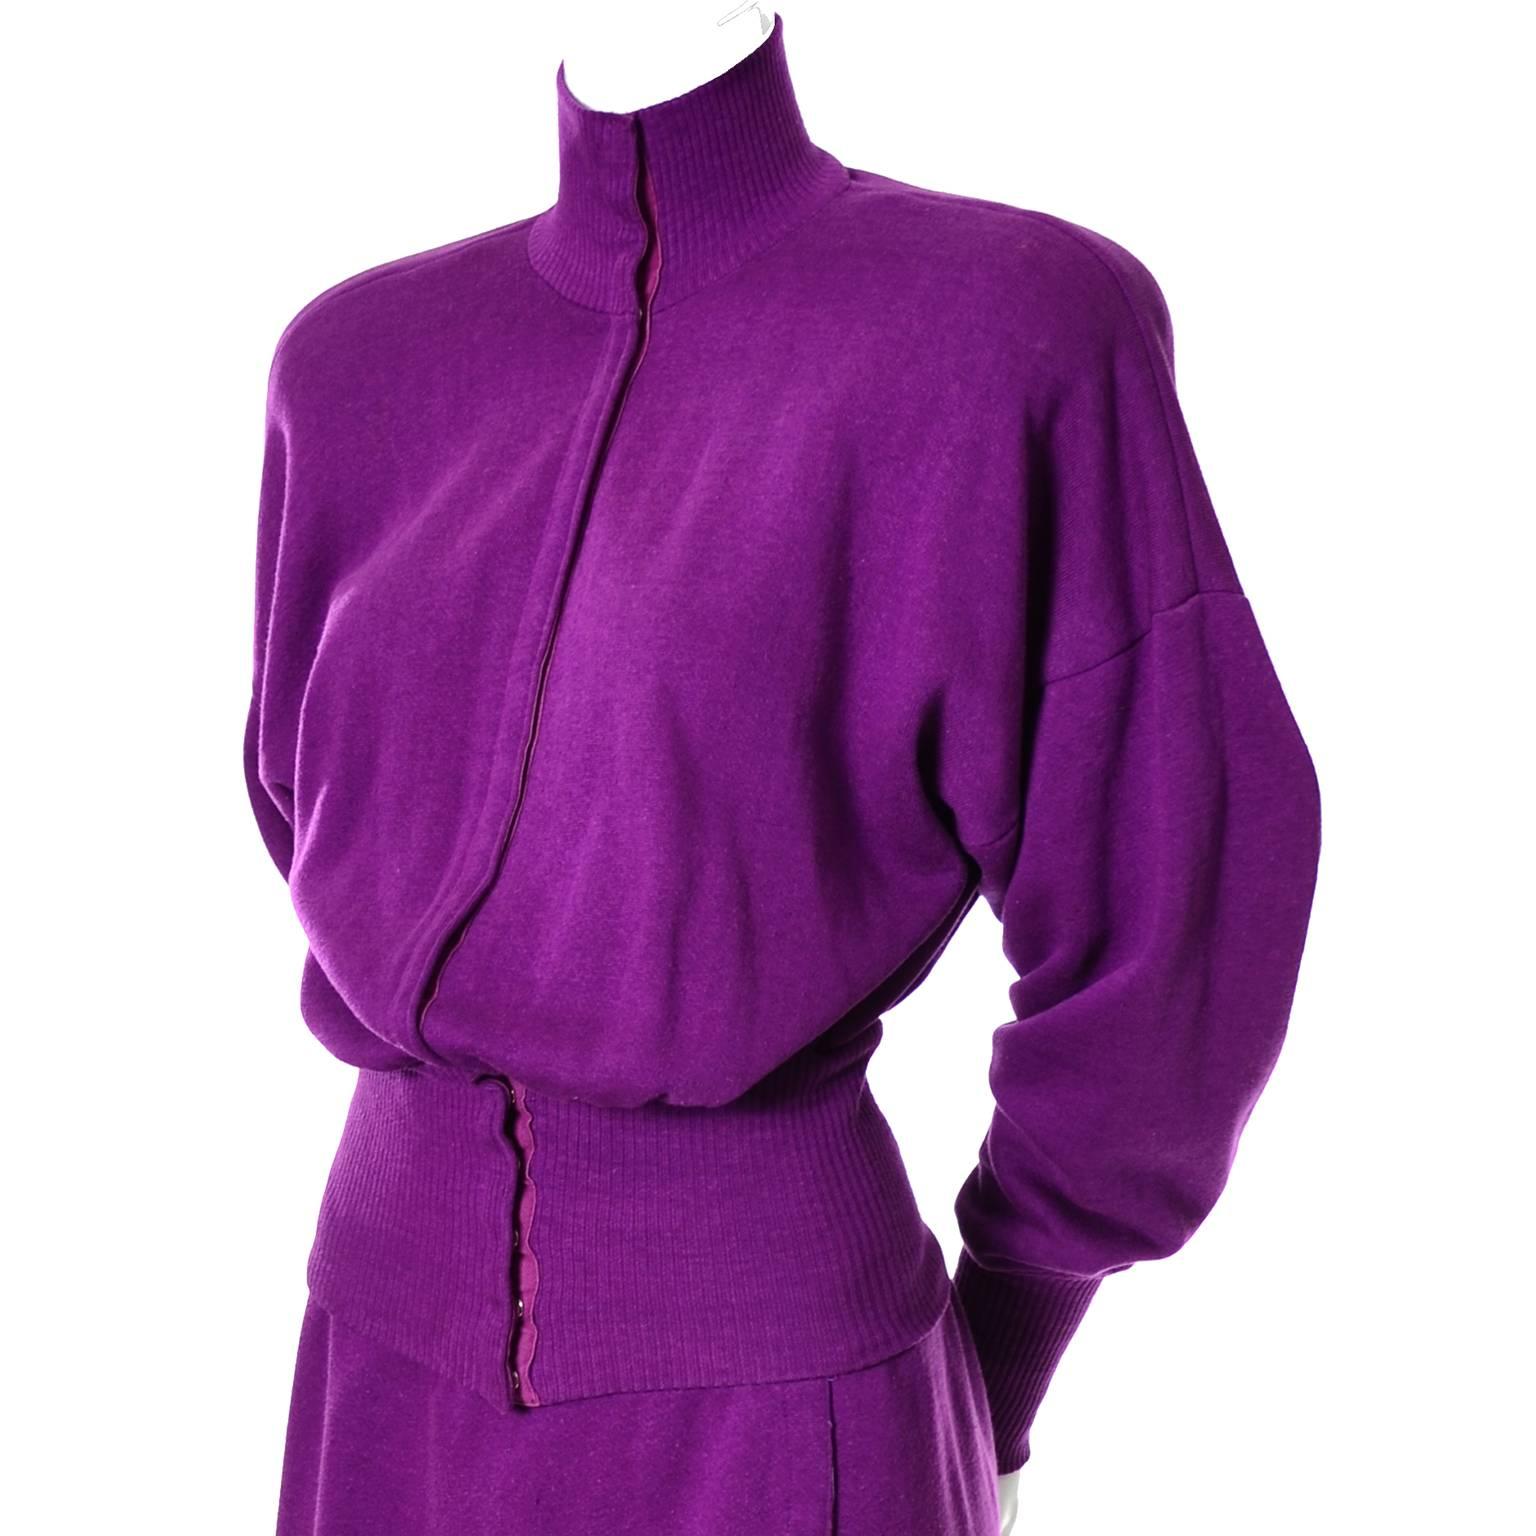 This is an iconic vintage 2 piece dress from Norma Kamali from the 1980's.  Norma Kamali was the first designer to so cleverly use sweatshirt or fleece fabric in modern chic pieces.  This 2 piece dress is one of her early 1980's designs and it